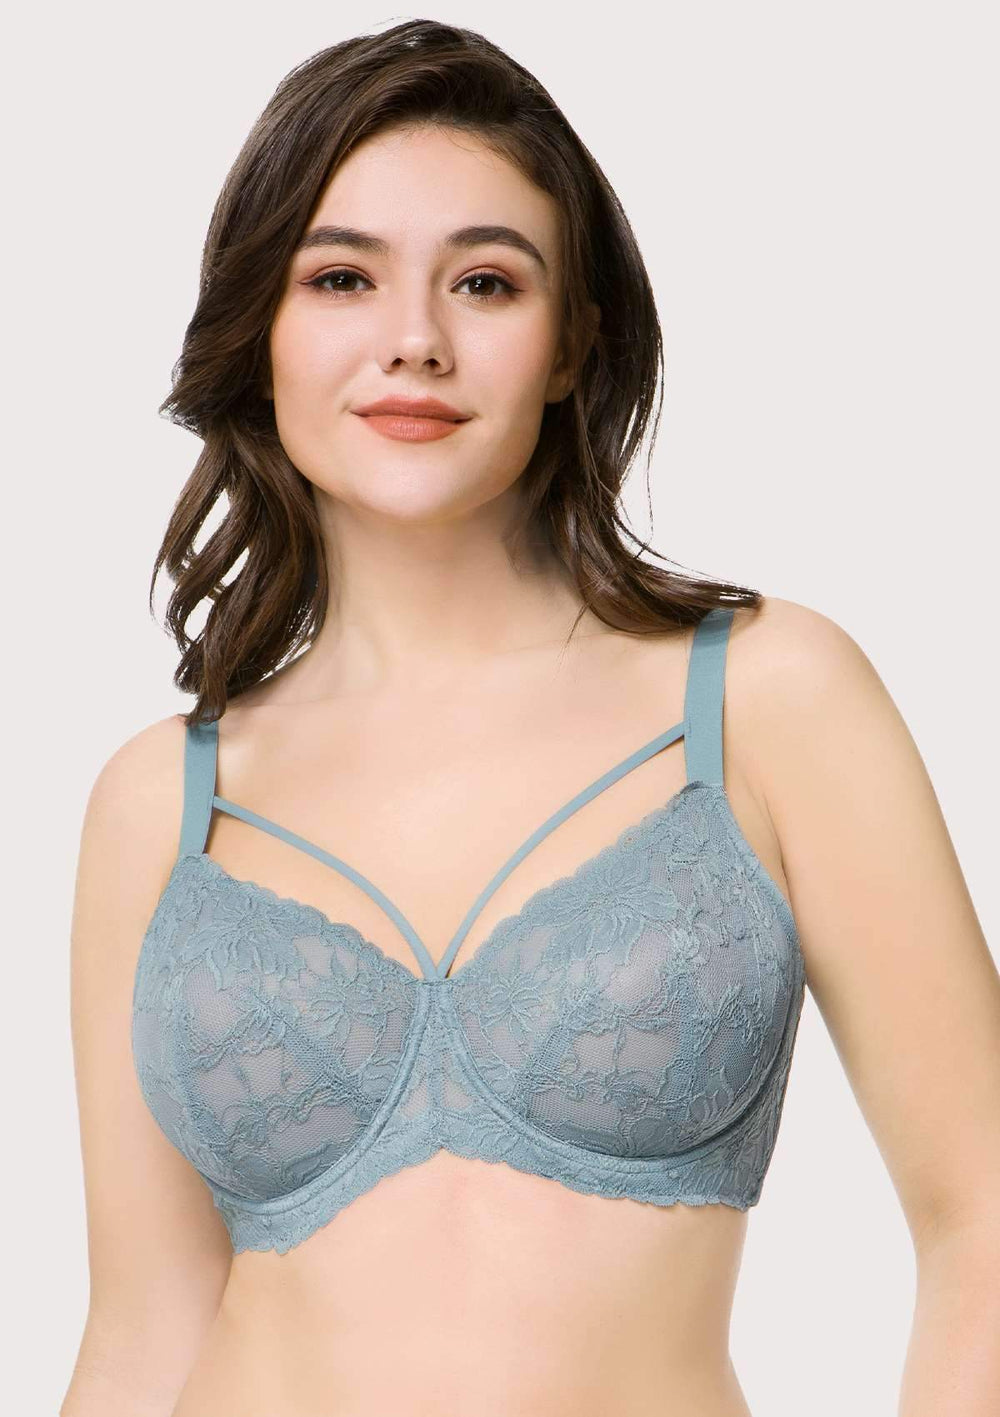 Sexy Unlined Good Support Lace Bra for Large Breasts, Gorsenia, Size: 32J  - 36DD, Color: Navy Blue